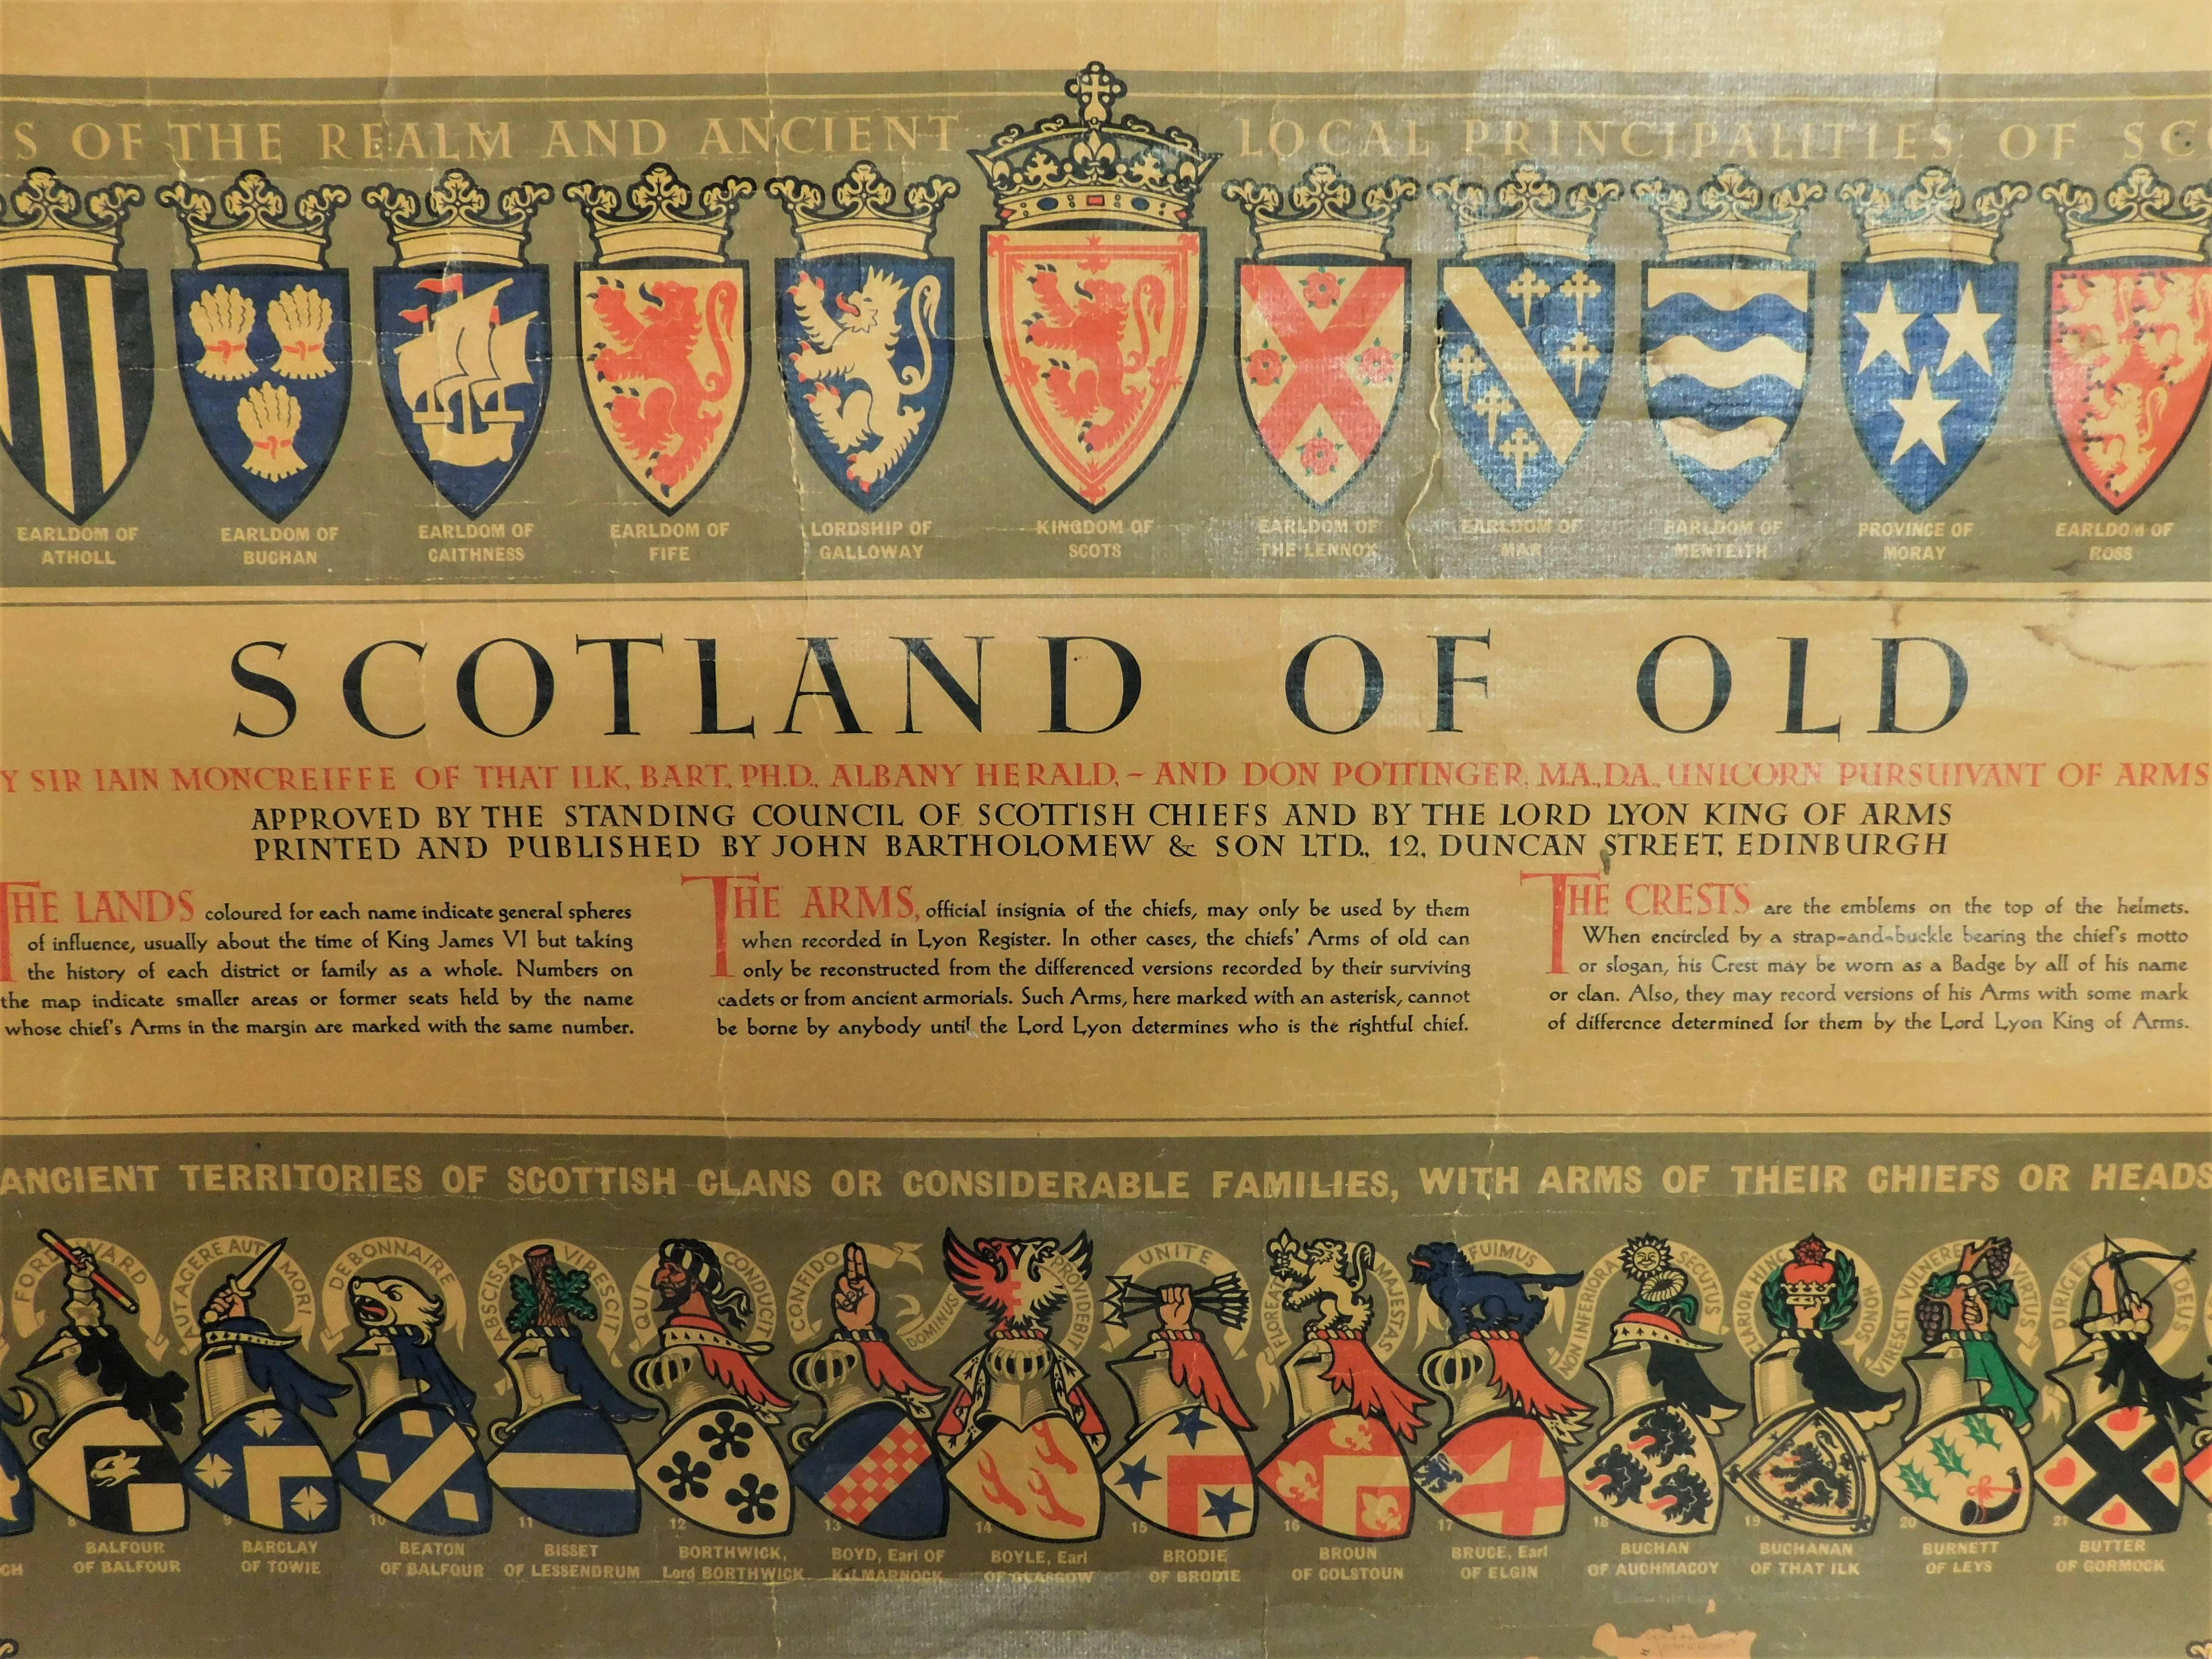 The Scotland of Old Clans Map is a unique pictorial map showing the ancient territories of the principal Scottish clans in the 17th century, and features Don Pottinger’s (Islay Herald of Arms) distinctive and original artwork of Scottish arms and